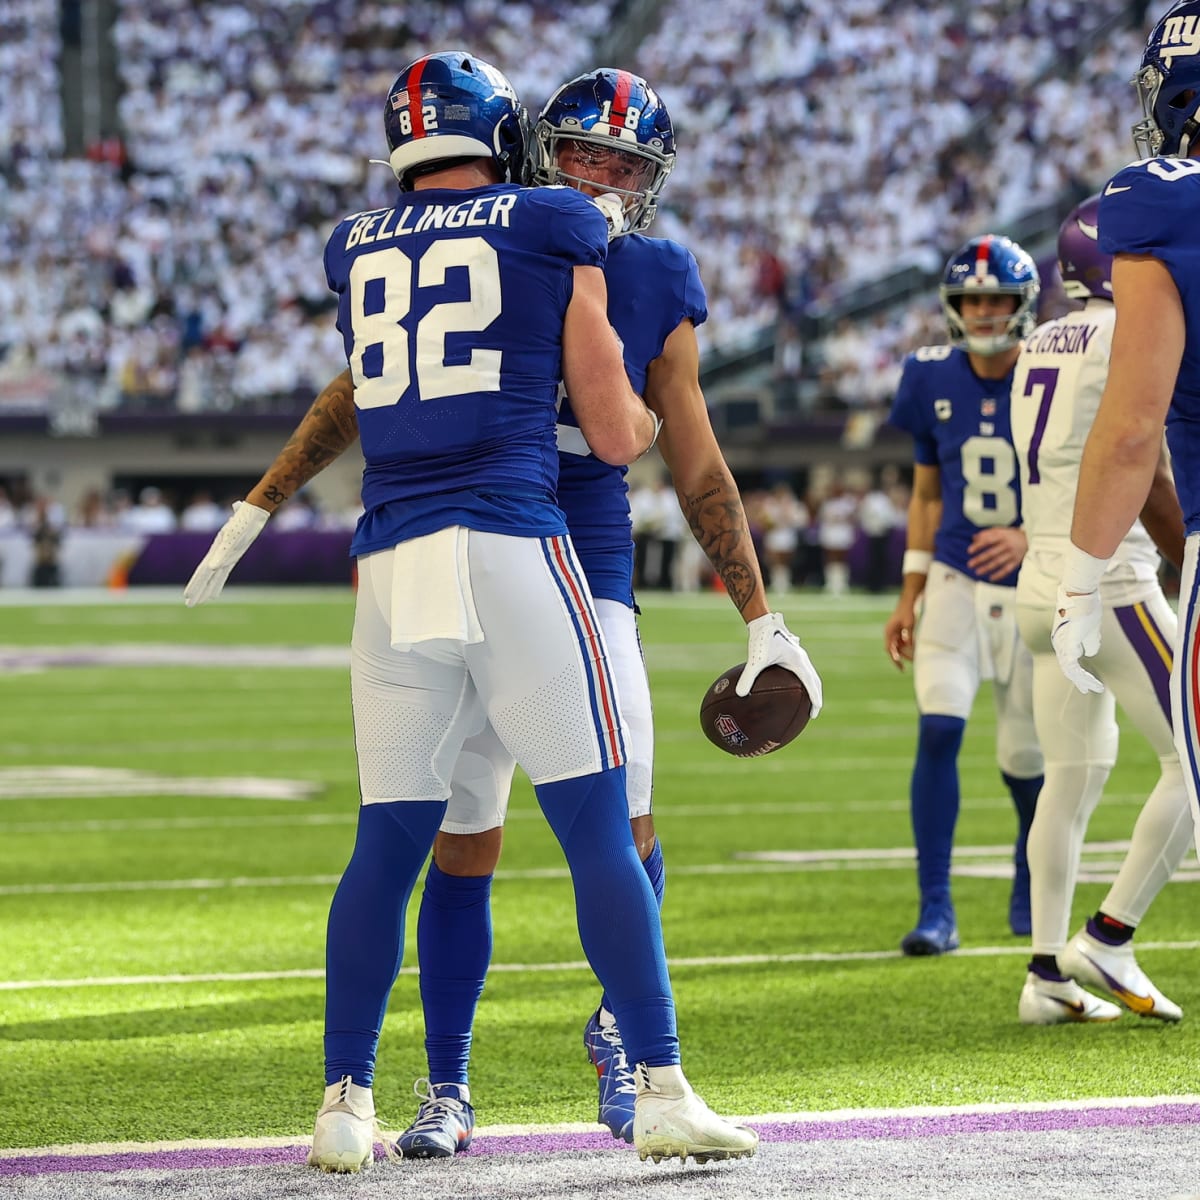 Giants suffer heartbreaking loss to Vikings on Christmas Eve